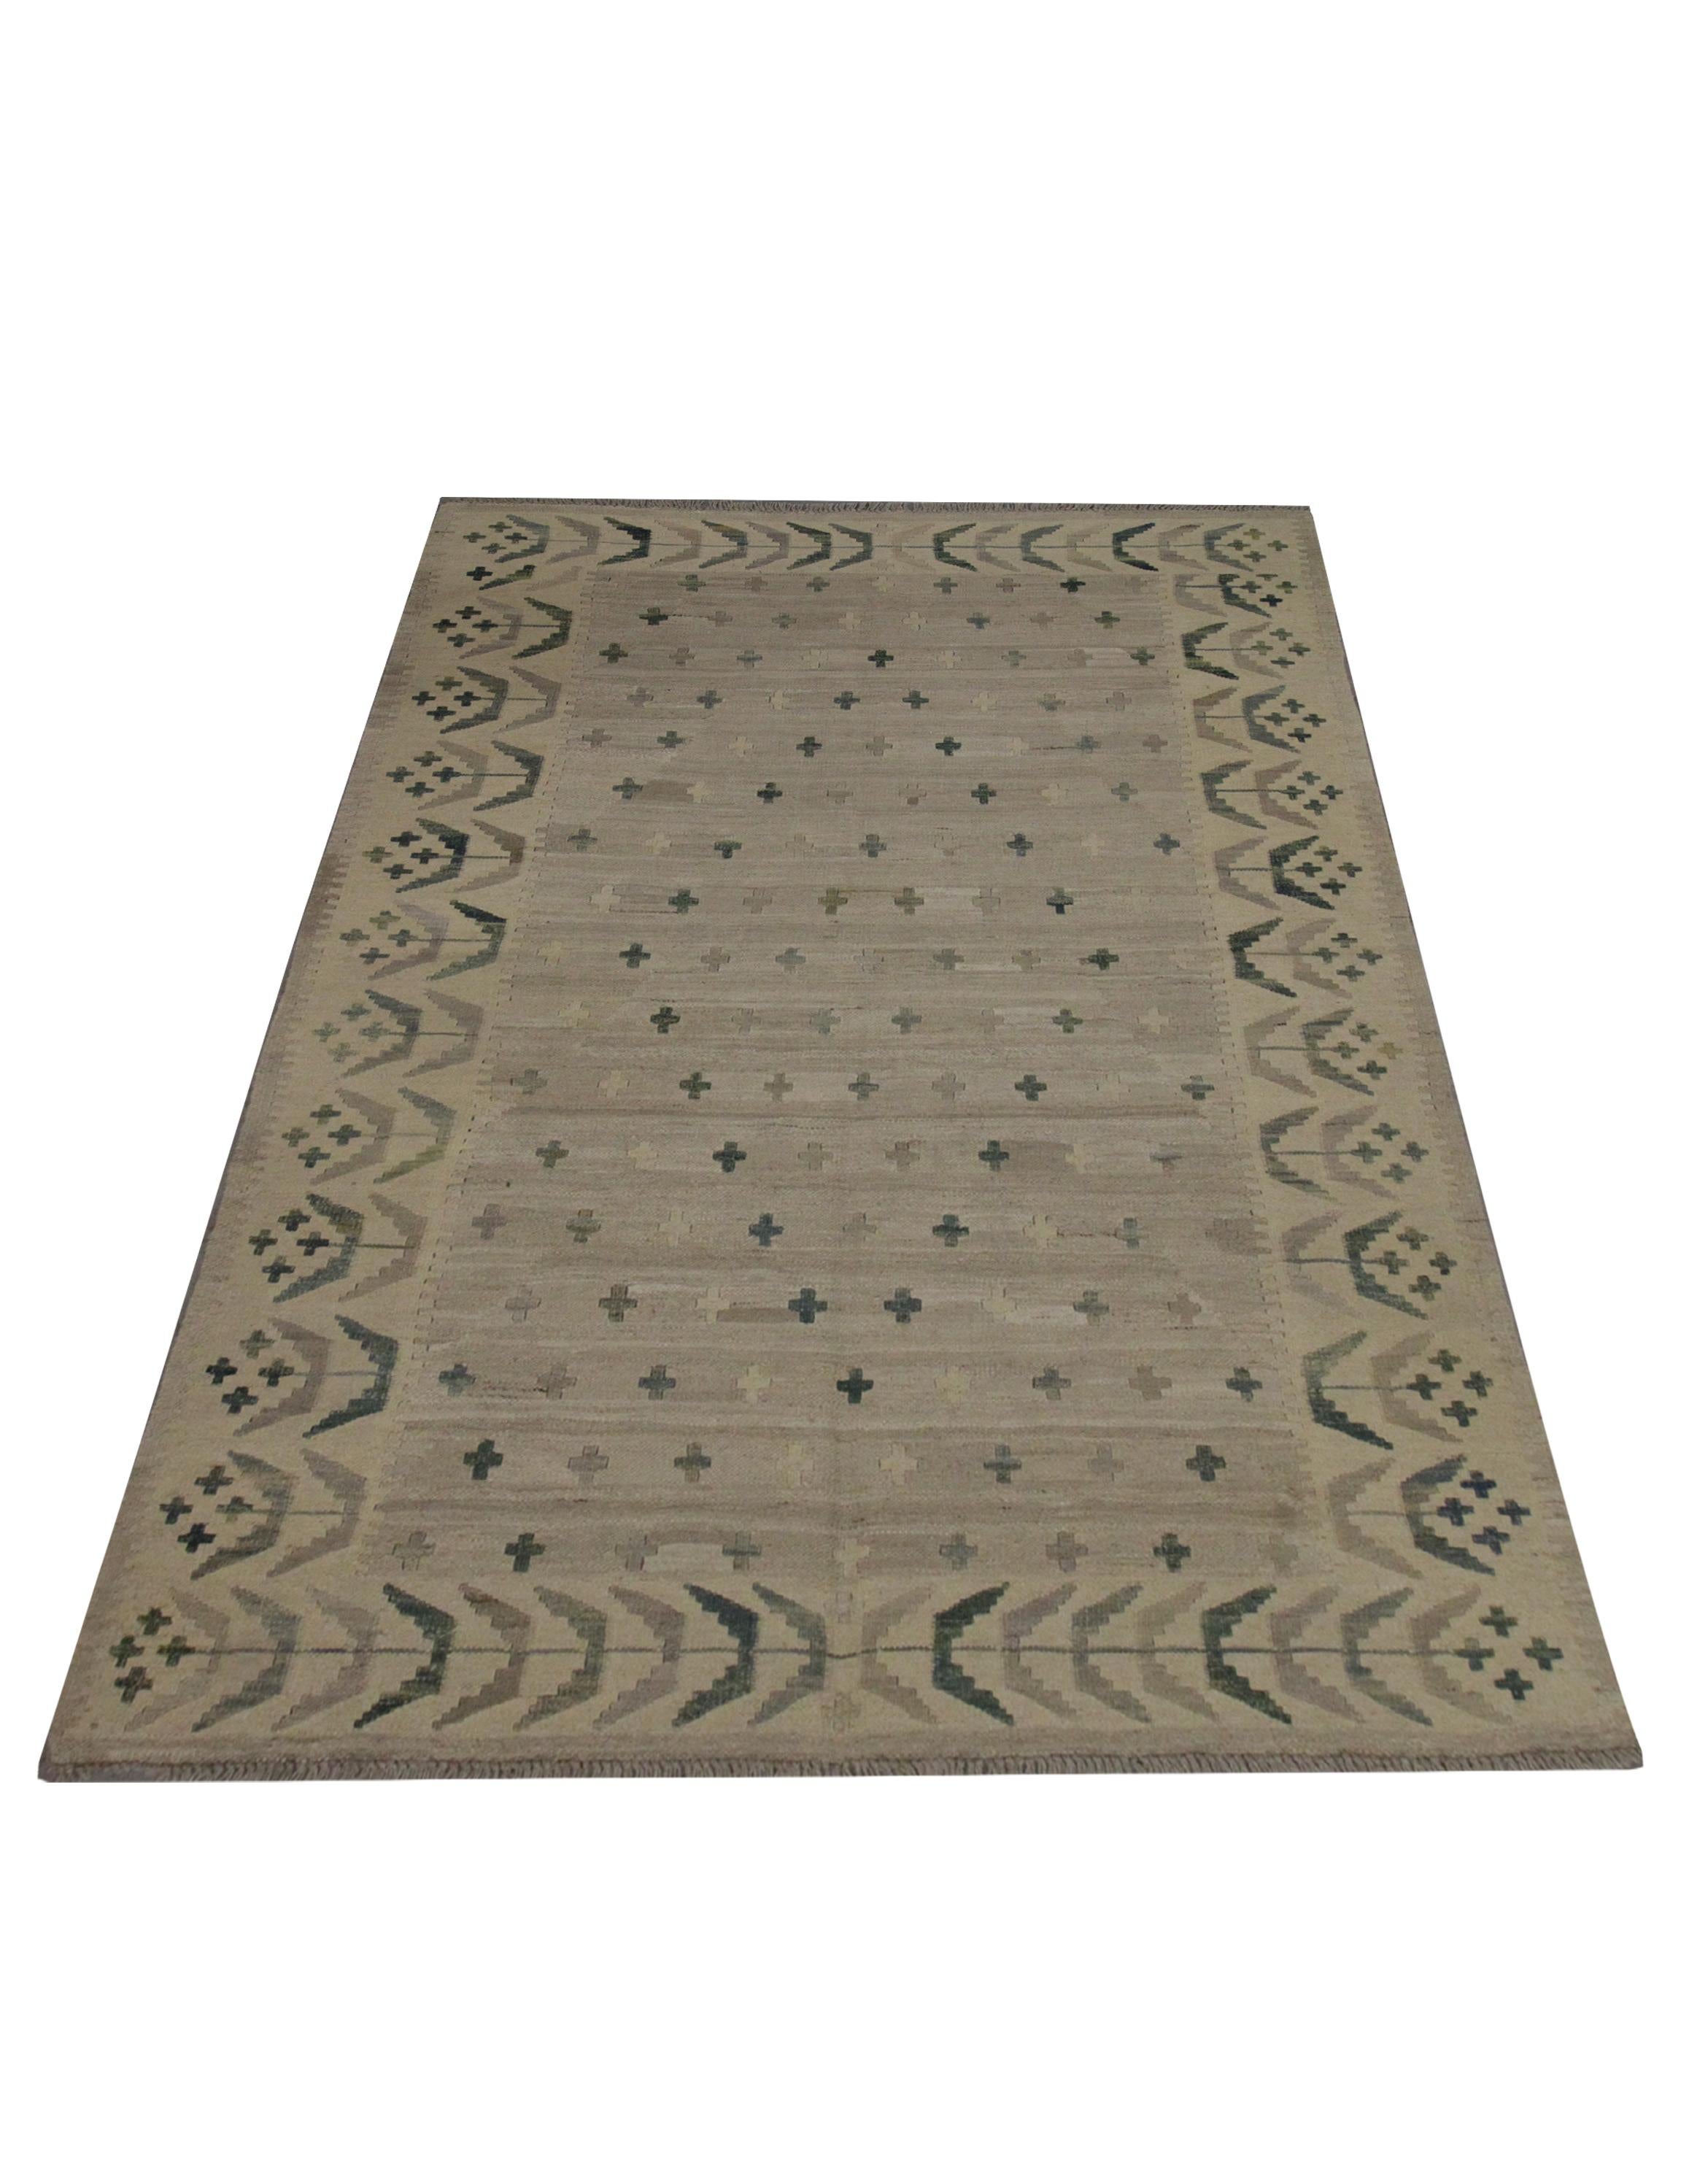 This unique wool Kilim area rug was woven in the early 21st century in Afghanistan. The design features a simple central design featuring a beige open field with Minimalist brown-grey, and blue cross motifs that are evenly scattered. A traditional